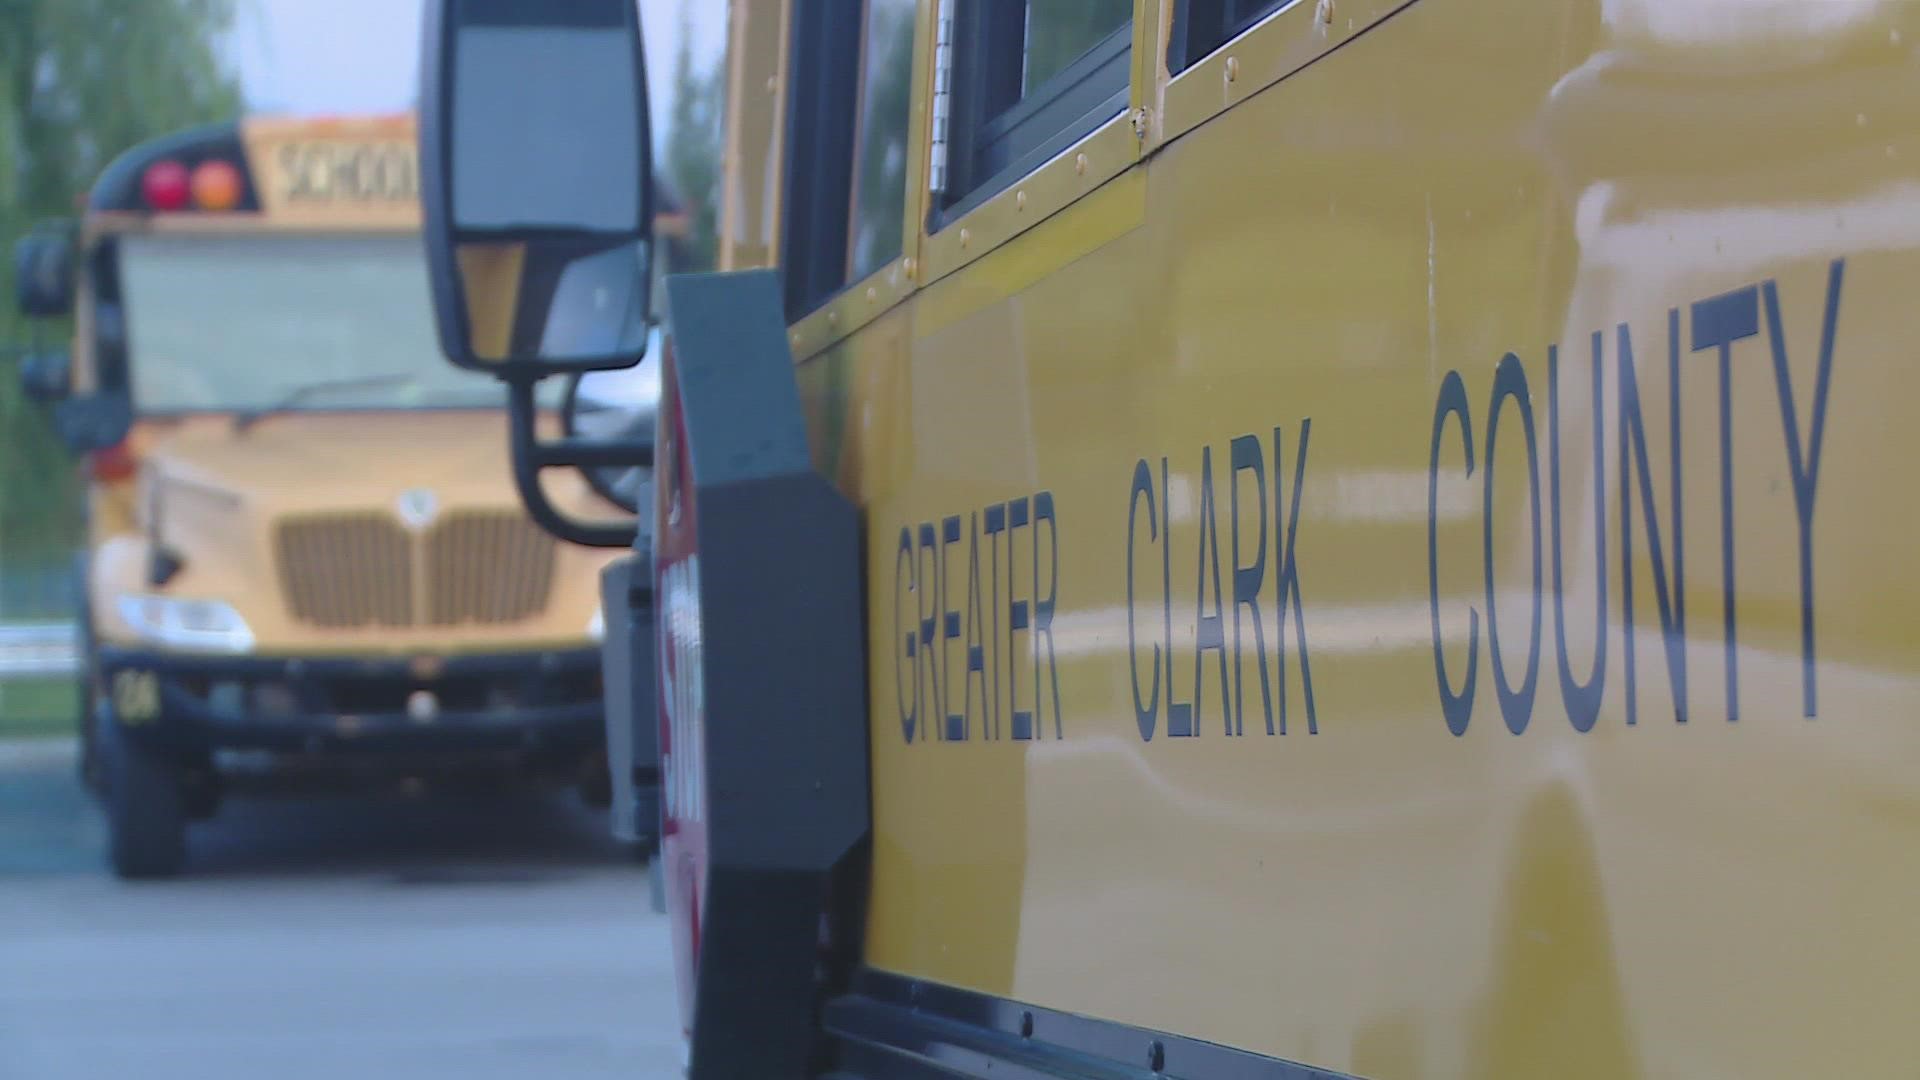 School officials said safety is at the top of mind this school year.